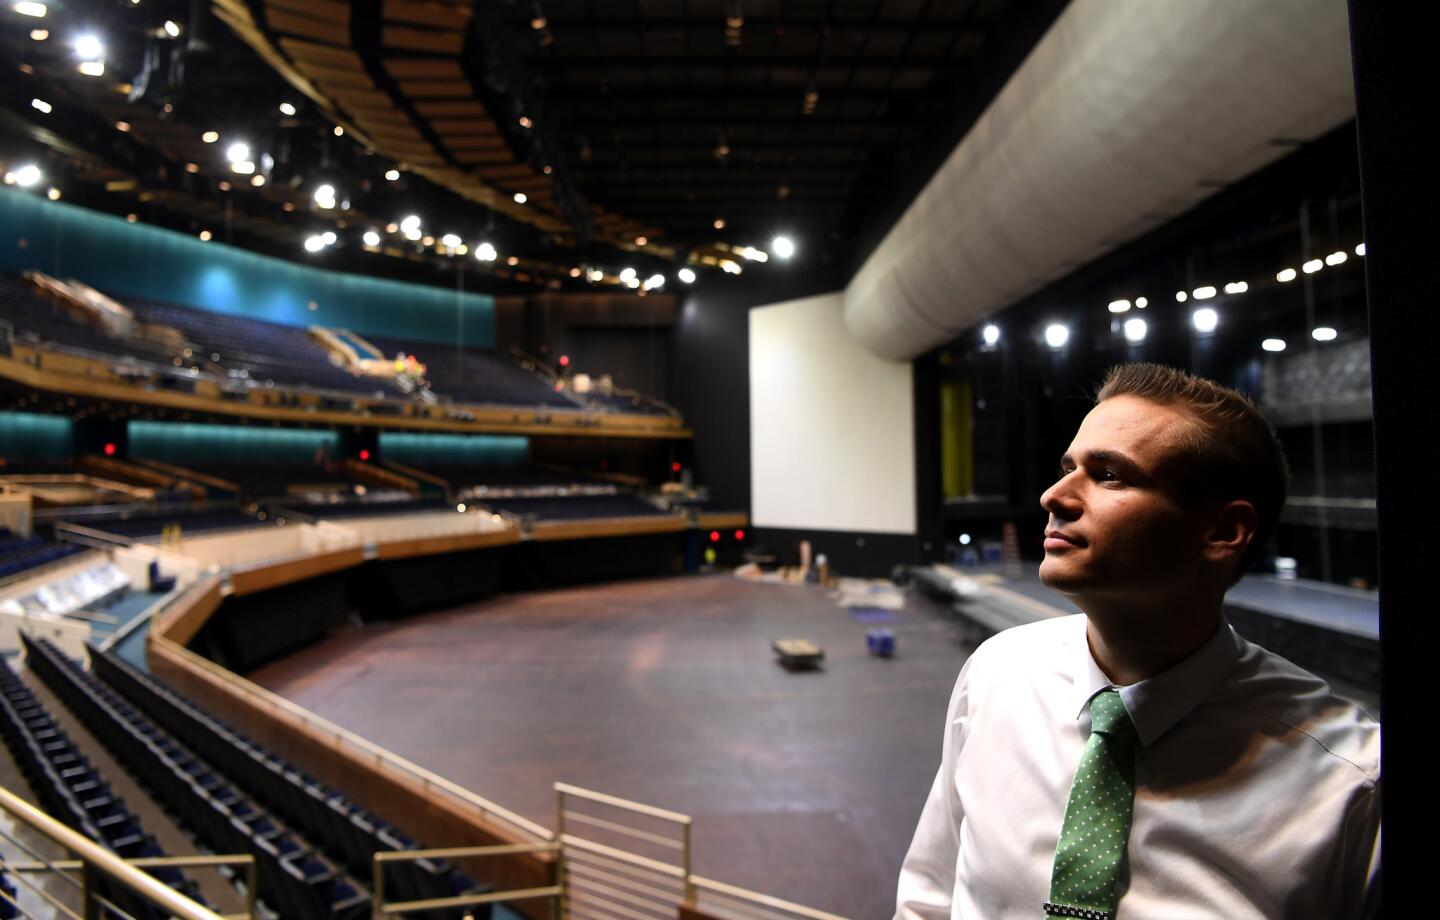 Dan Bernbach, the executive director of the Park Theatre, stands insdie the newly constructed stage inside the Monte Carlo in Las Vegas.